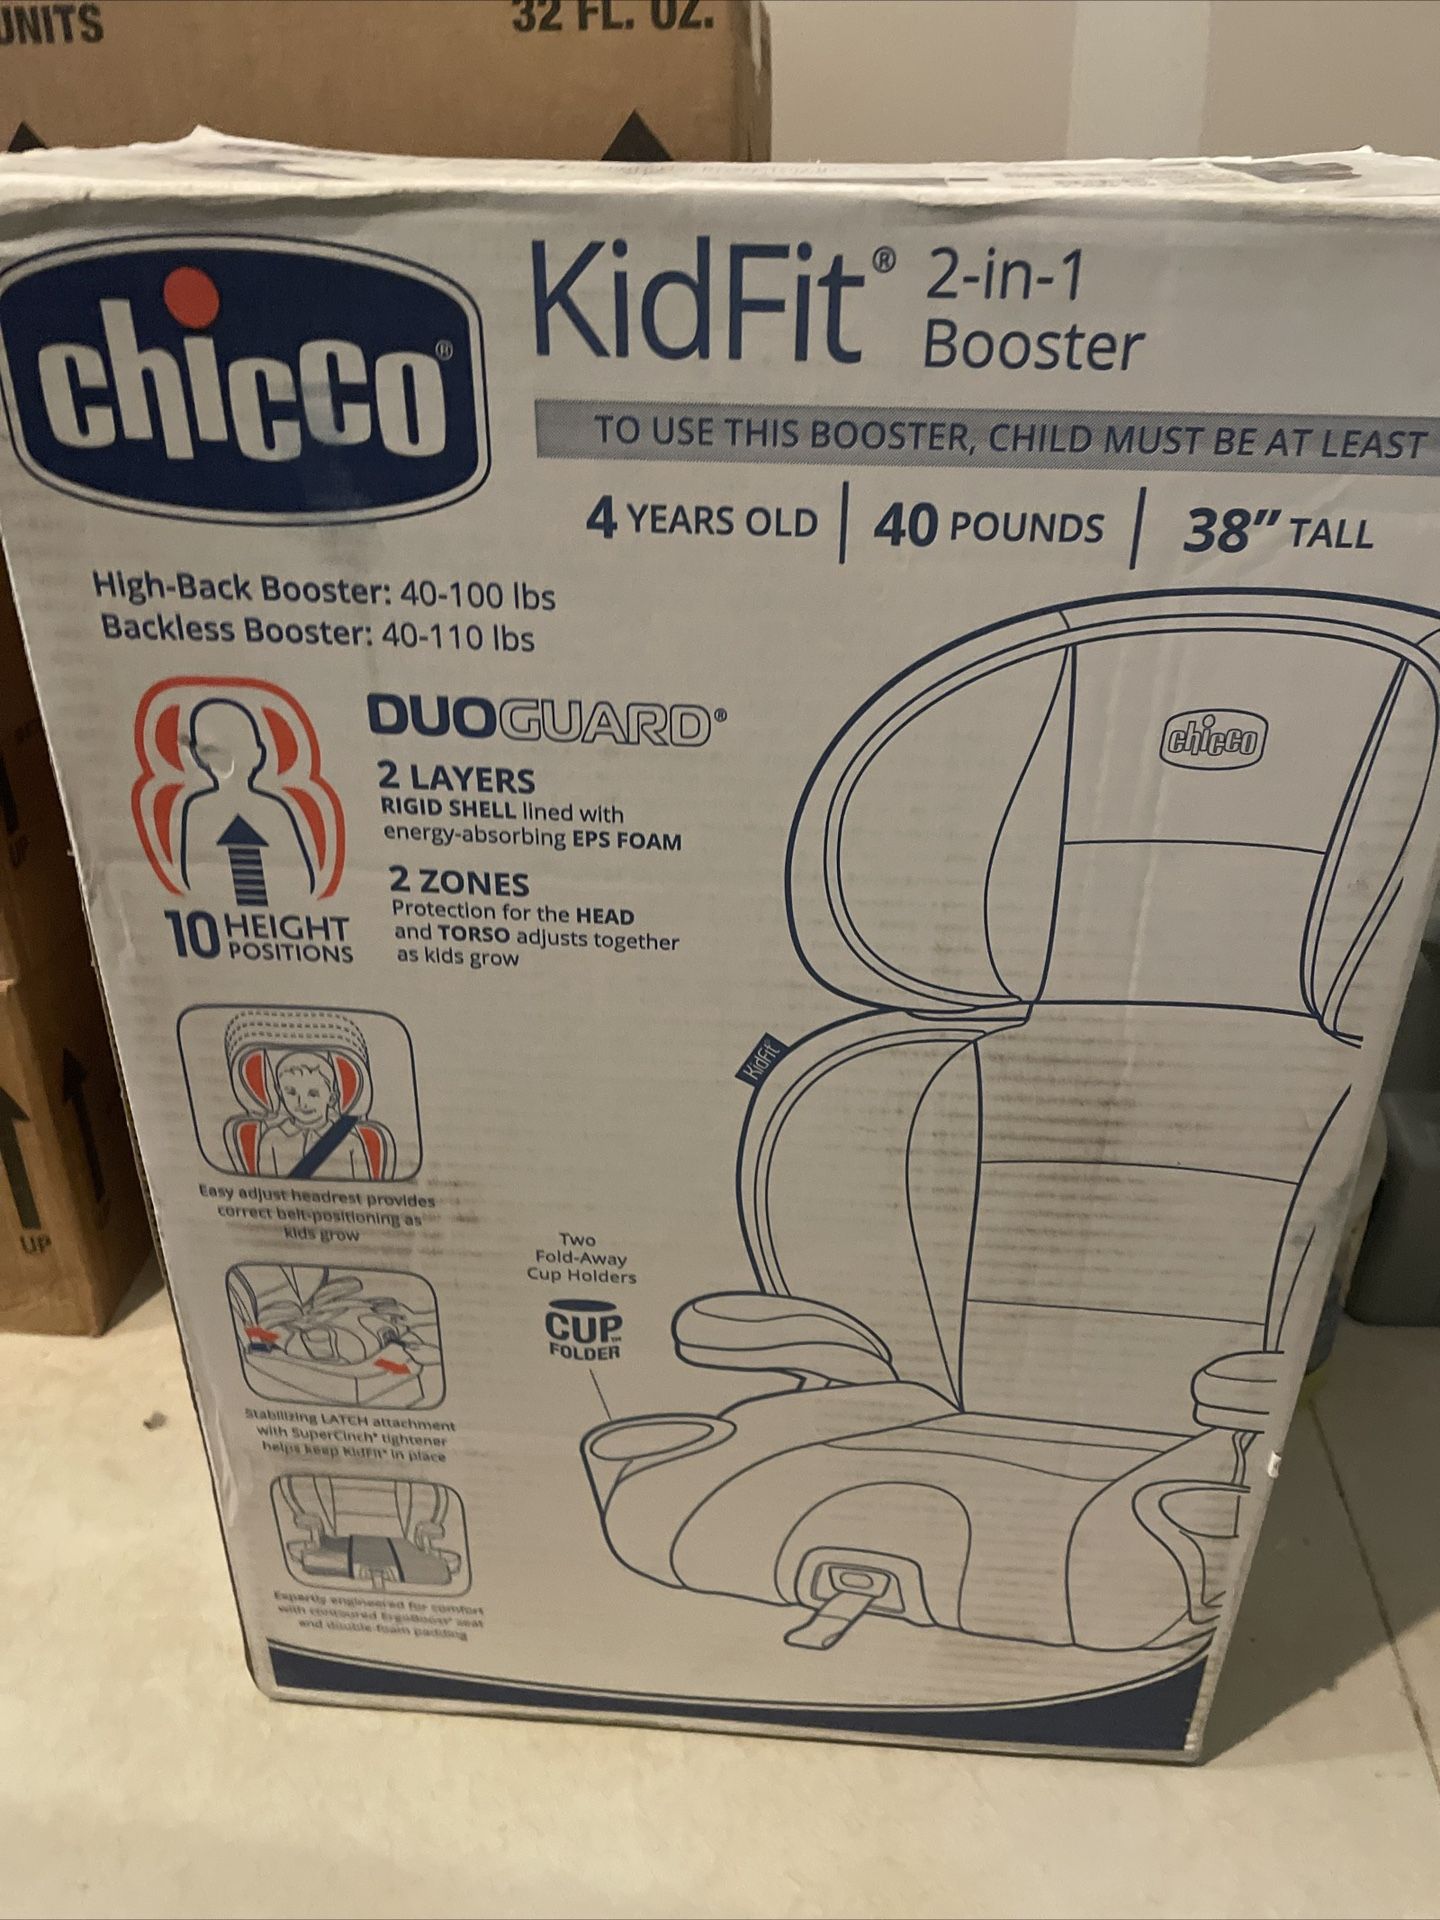 Chicco Kid Fit Zip 2-In-1 Booster Brand New In Box Sealed  4 Year Old 40 40 Lbs